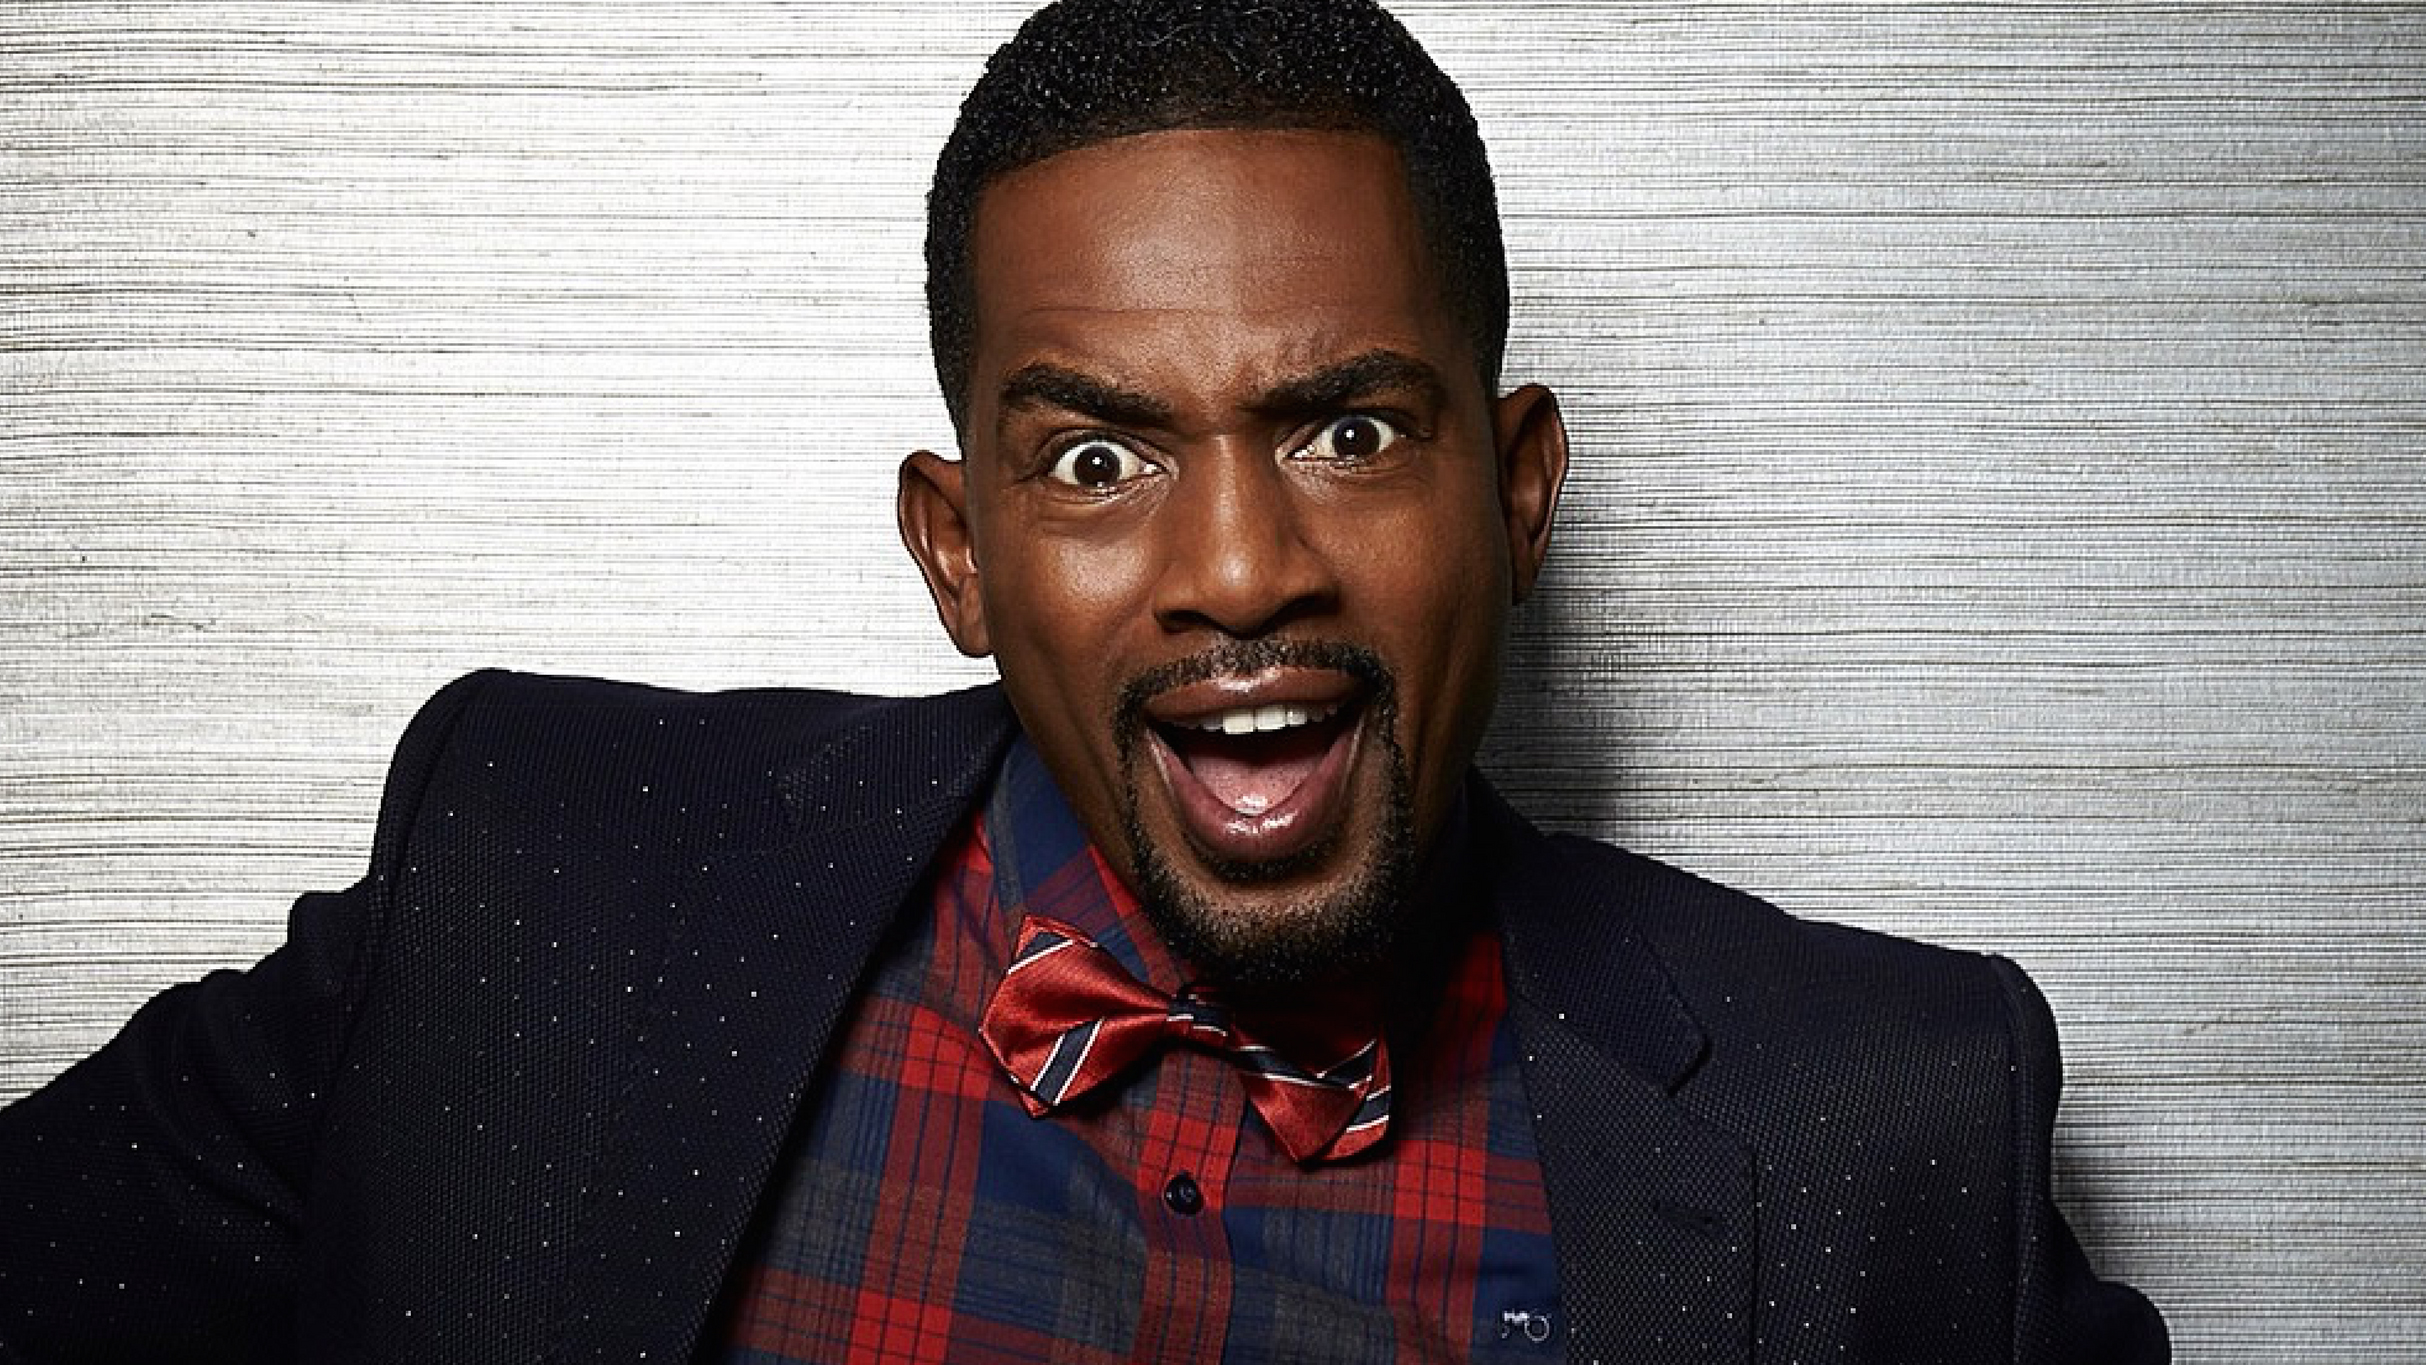 "Comedy Live" UP Close & Personal with Bill Bellamy & FRIENDS